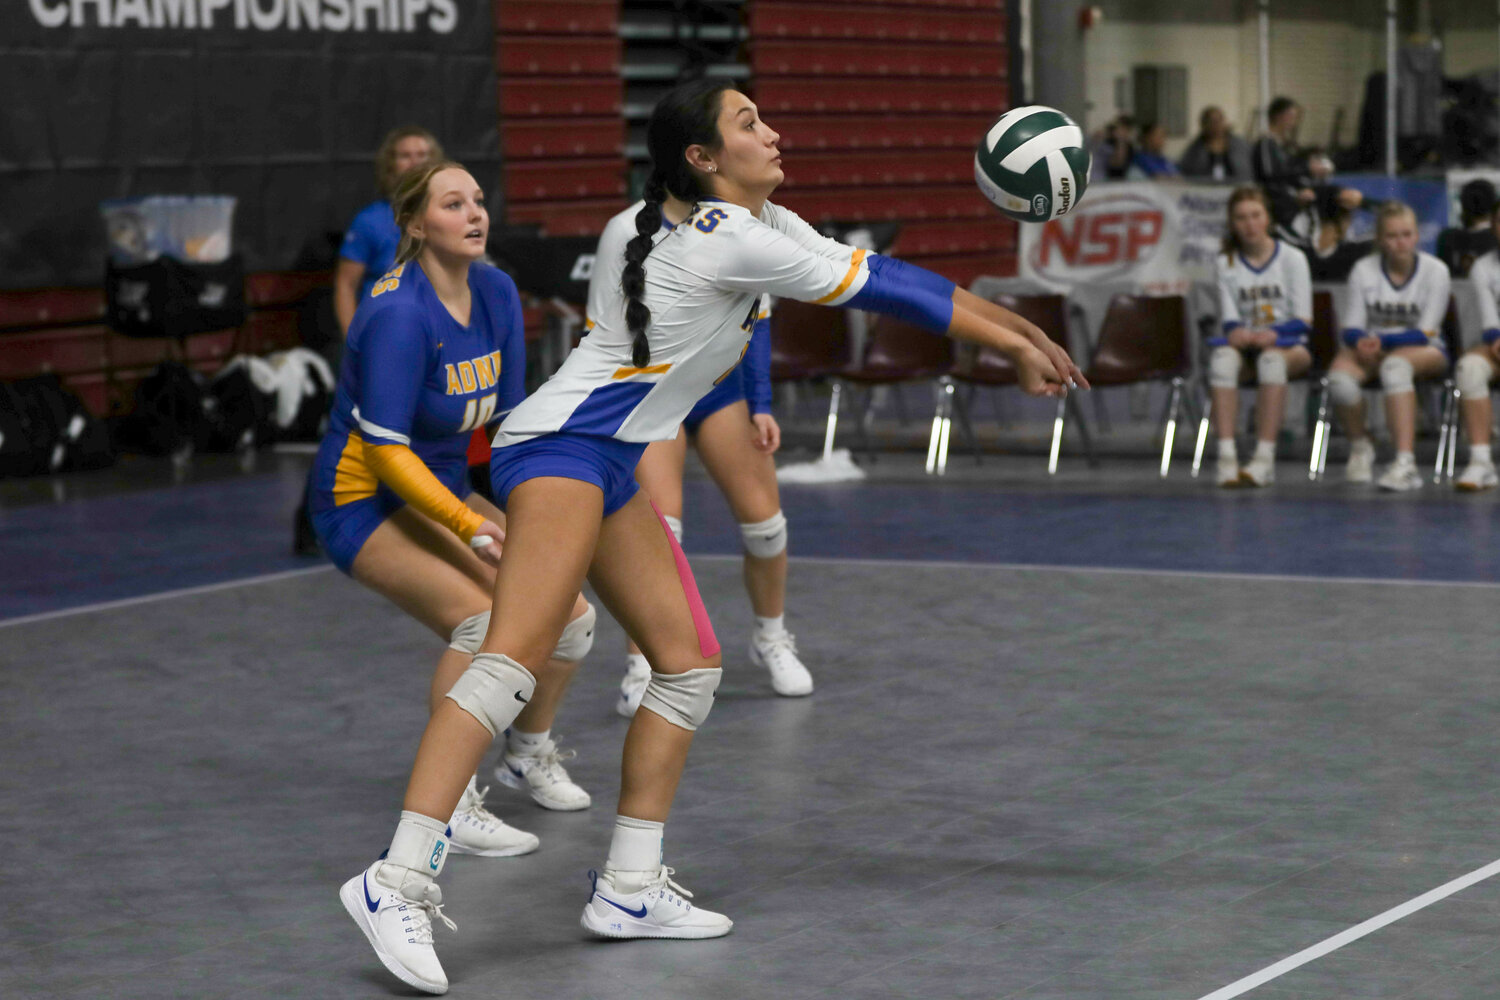 Charissa Schierman leans left to dig a ball during Adna's win over Okanogan in the fifth-place game at the state tournament on Nov. 9 in Yakima.